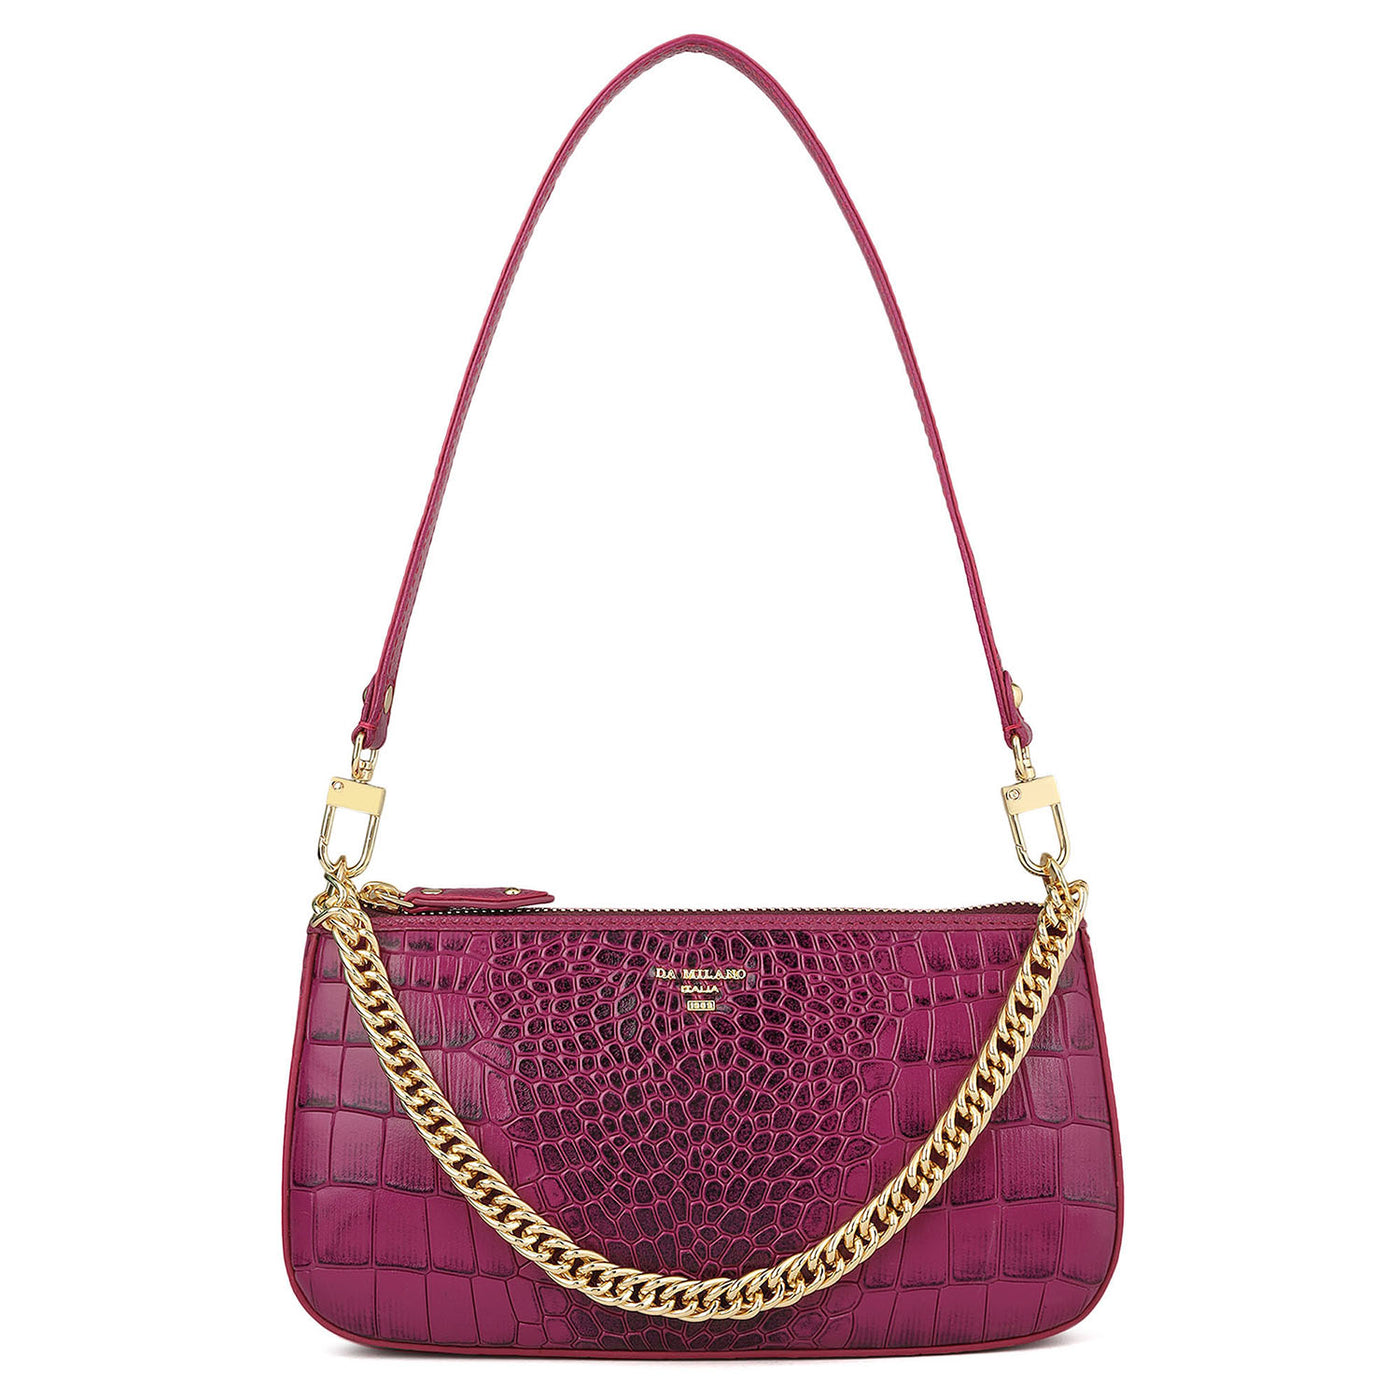 Small Croco Leather Shoulder Bag - Orchid